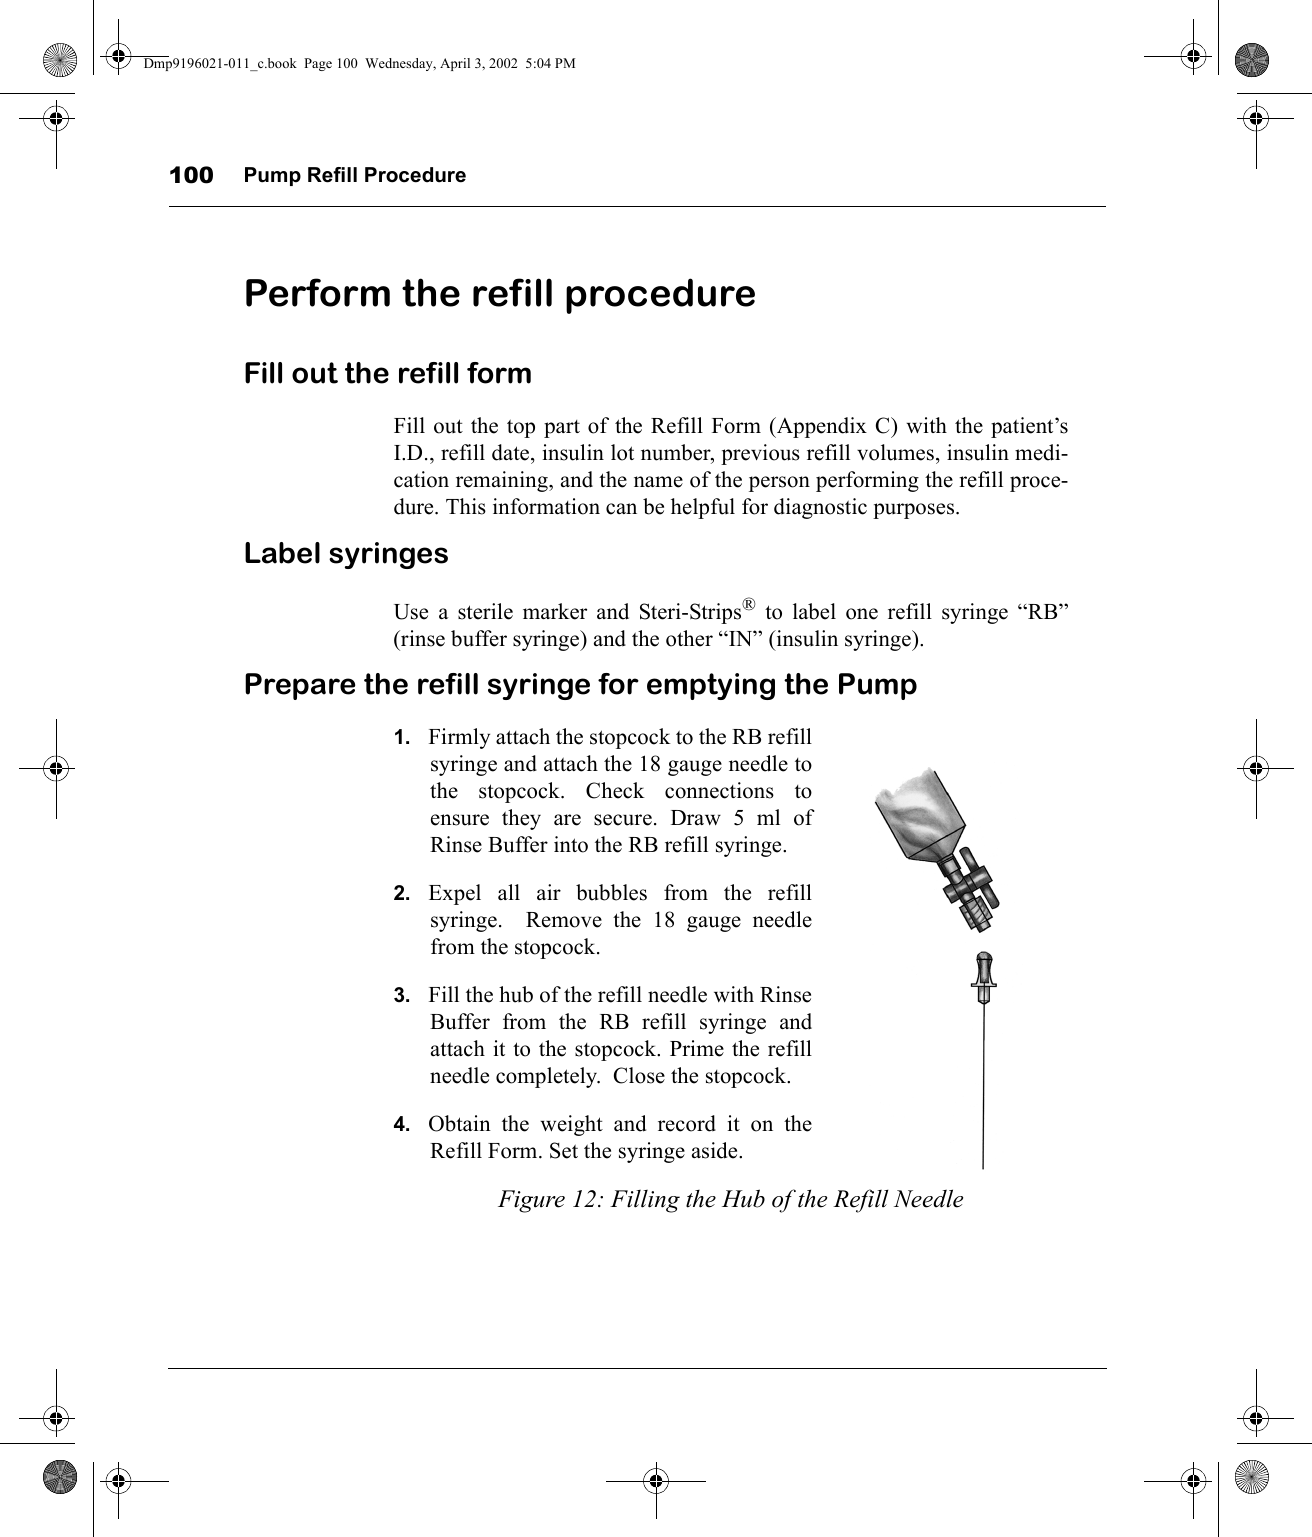 Pump Refill Procedure100Perform the refill procedureFill out the refill formFill out the top part of the Refill Form (Appendix C) with the patient’sI.D., refill date, insulin lot number, previous refill volumes, insulin medi-cation remaining, and the name of the person performing the refill proce-dure. This information can be helpful for diagnostic purposes.Label syringesUse a sterile marker and Steri-Strips® to label one refill syringe “RB”(rinse buffer syringe) and the other “IN” (insulin syringe).Prepare the refill syringe for emptying the Pump1. Firmly attach the stopcock to the RB refillsyringe and attach the 18 gauge needle tothe stopcock. Check connections toensure they are secure. Draw 5 ml ofRinse Buffer into the RB refill syringe.2. Expel all air bubbles from the refillsyringe.  Remove the 18 gauge needlefrom the stopcock.3. Fill the hub of the refill needle with RinseBuffer from the RB refill syringe andattach it to the stopcock. Prime the refillneedle completely.  Close the stopcock.4. Obtain the weight and record it on theRefill Form. Set the syringe aside.Figure 12: Filling the Hub of the Refill NeedleDmp9196021-011_c.book  Page 100  Wednesday, April 3, 2002  5:04 PM